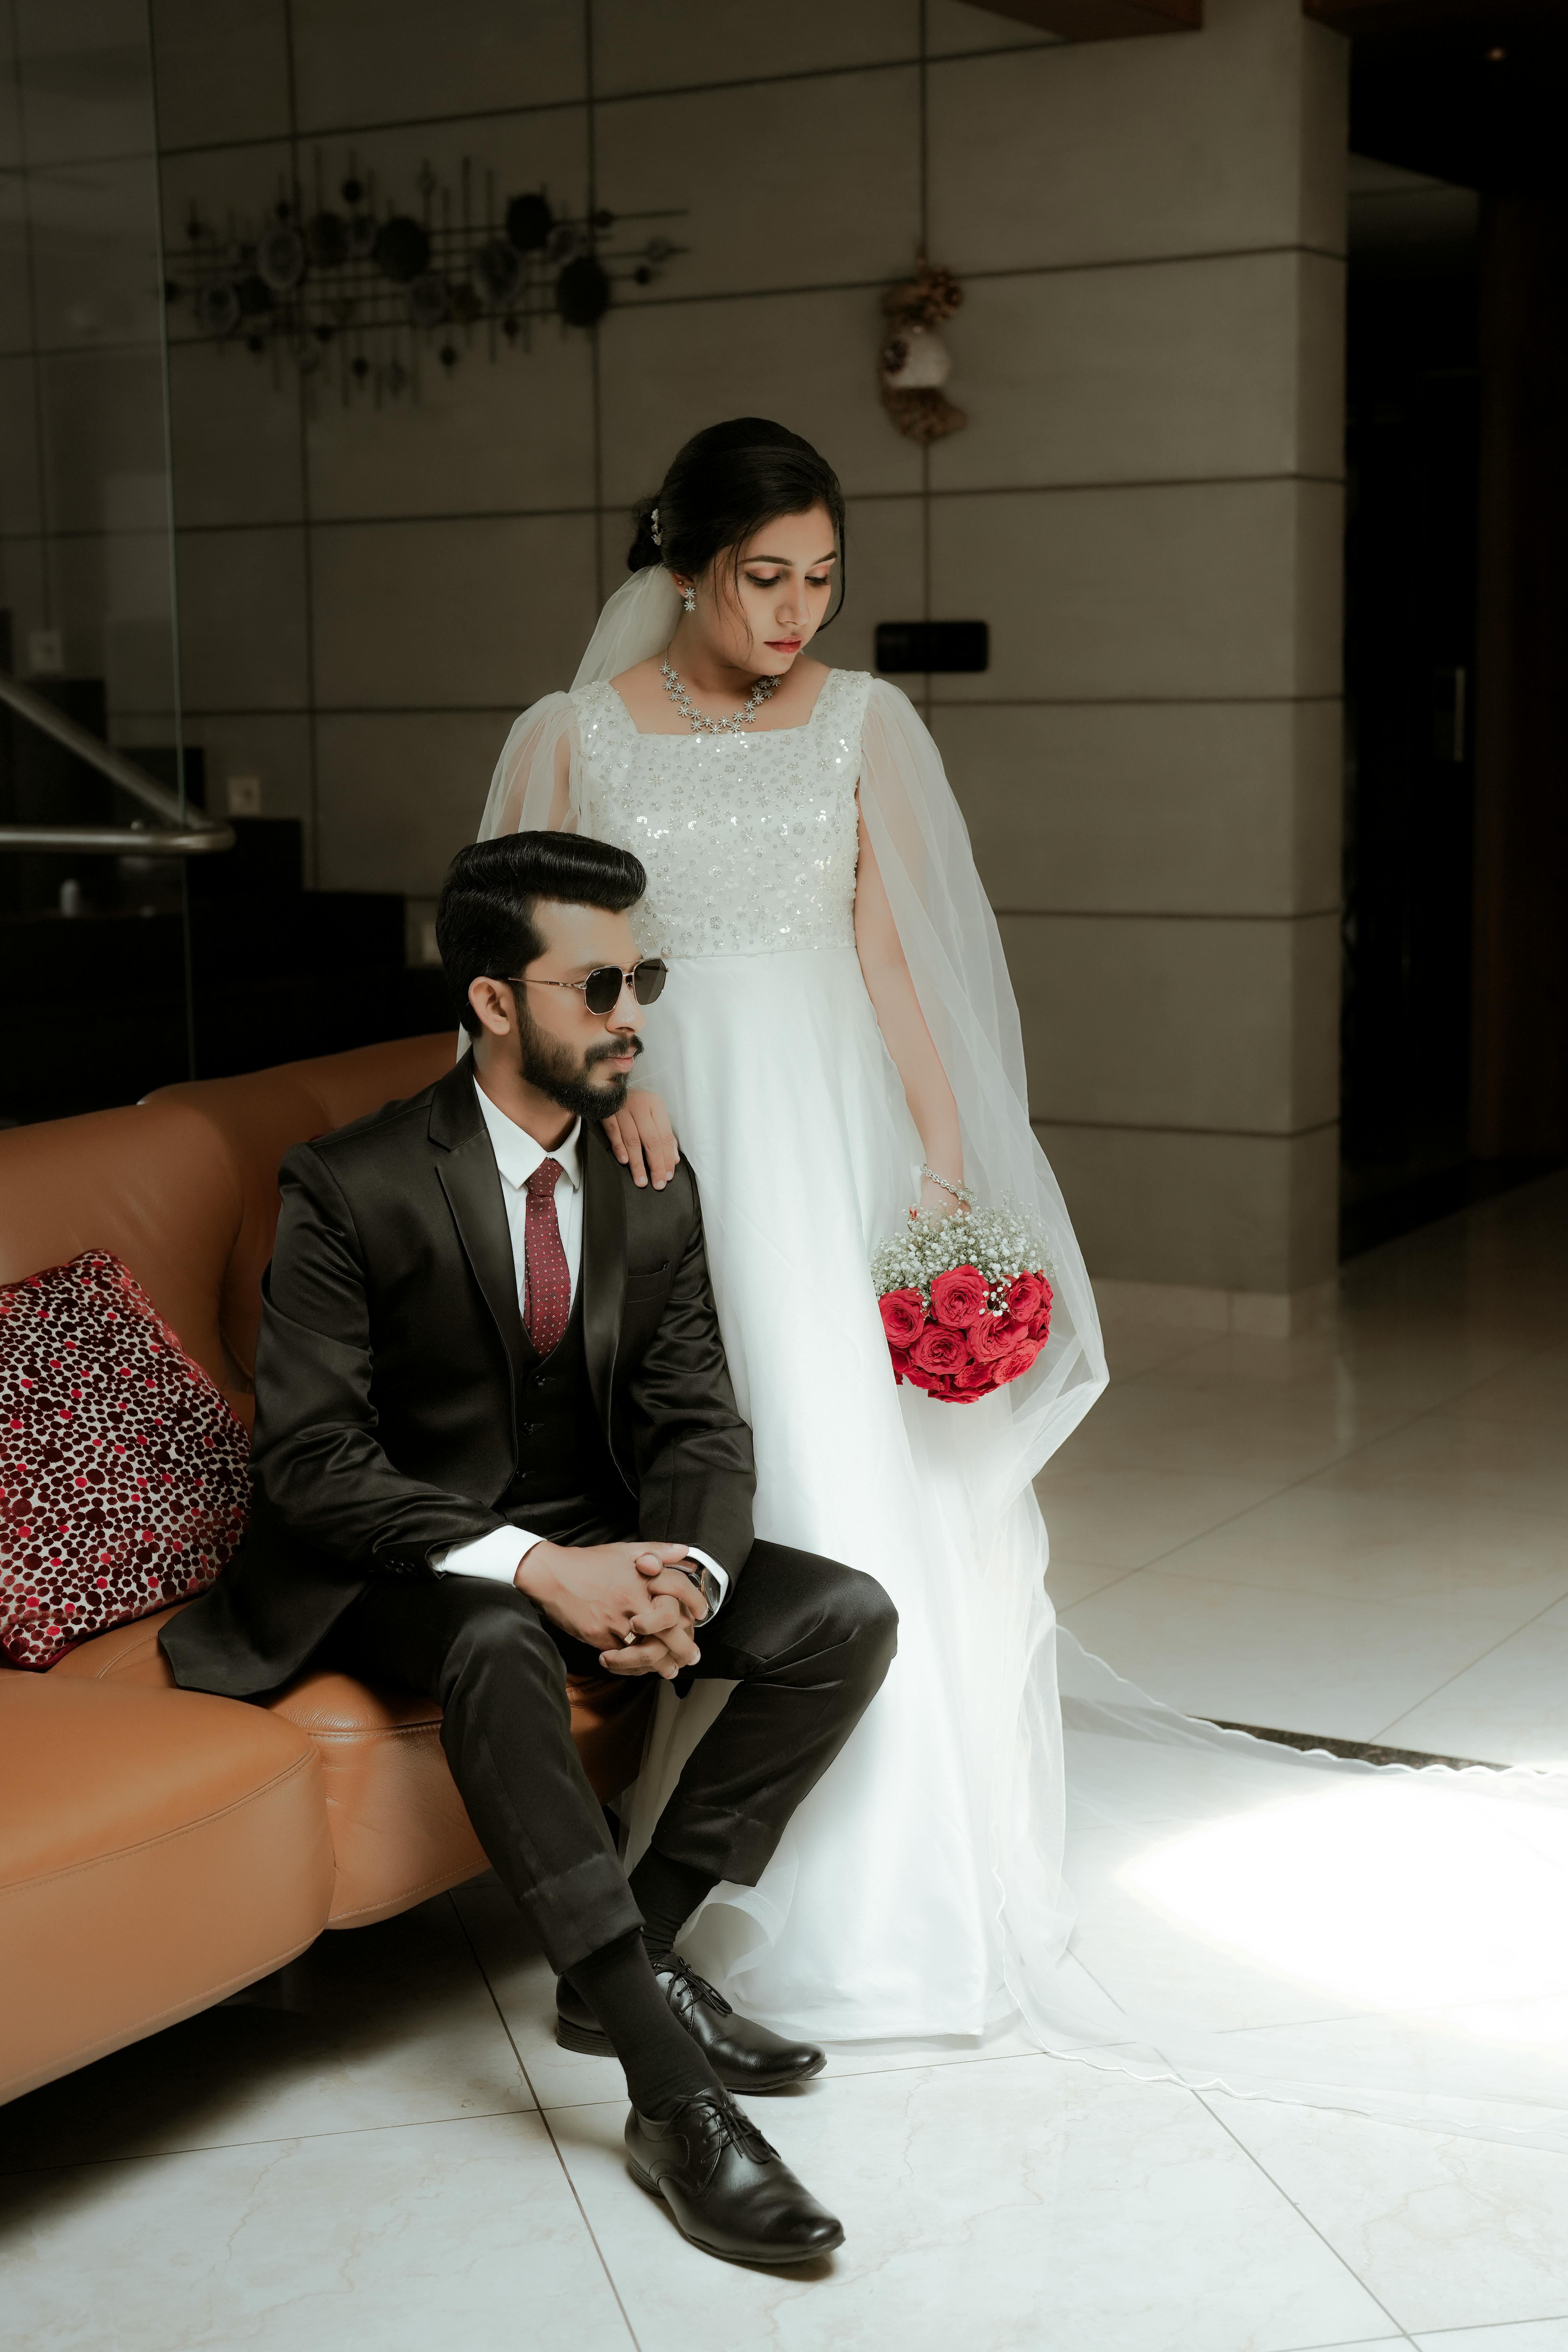 free photo of groom sitting on a couch and the bride standing beside